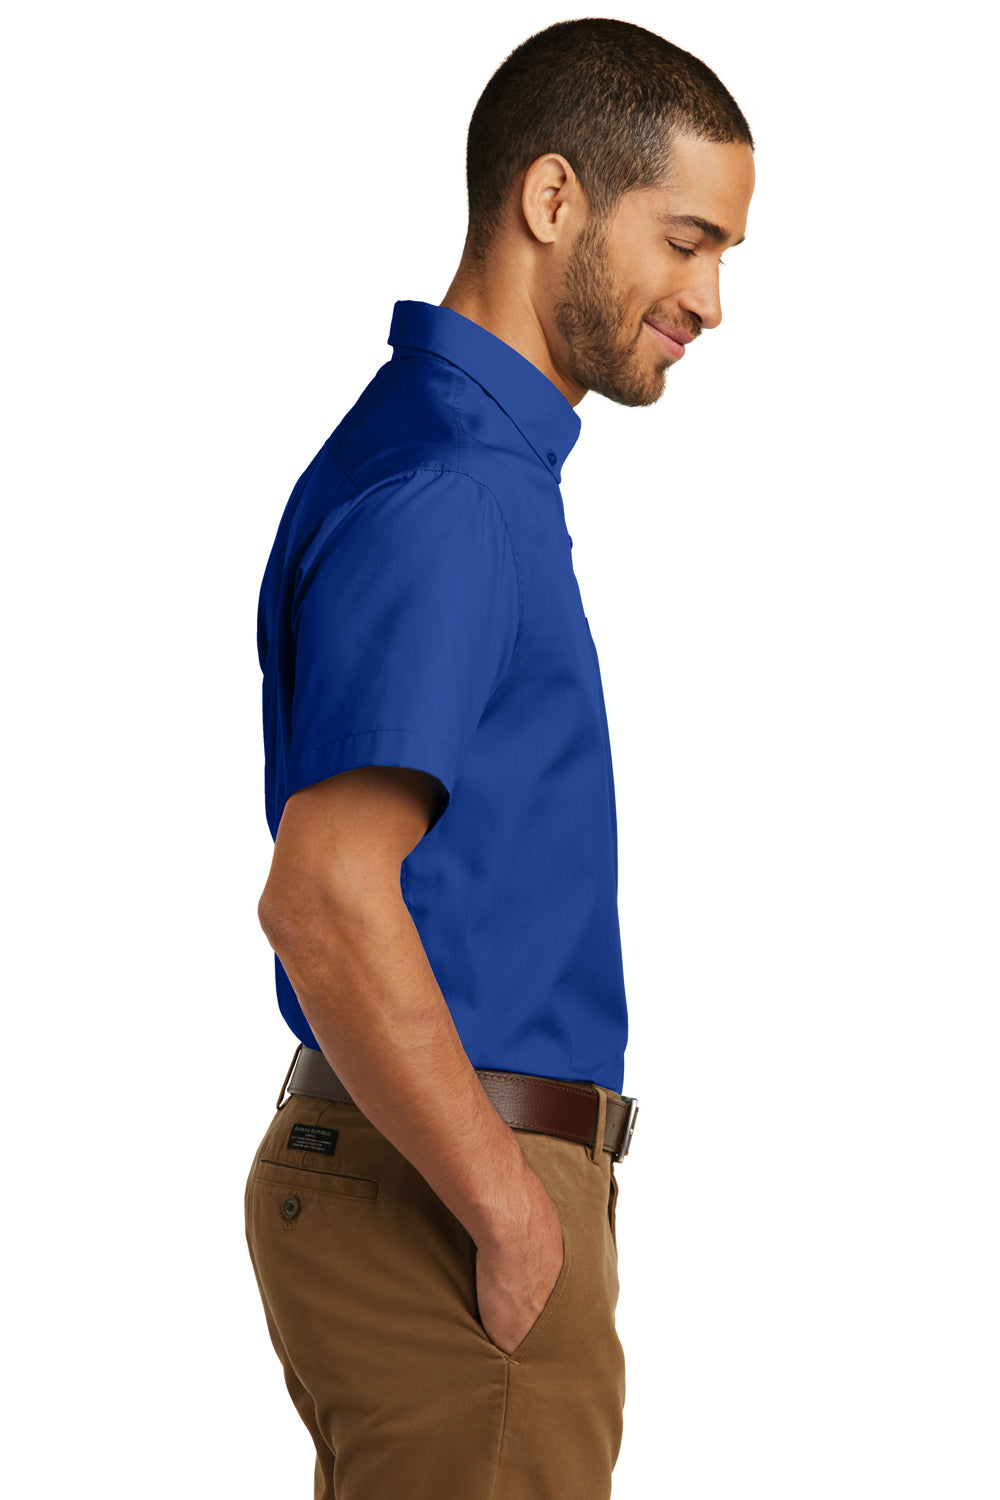 Port Authority W101 Mens Carefree Stain Resistant Short Sleeve Button Down Shirt w/ Pocket Royal Blue Side